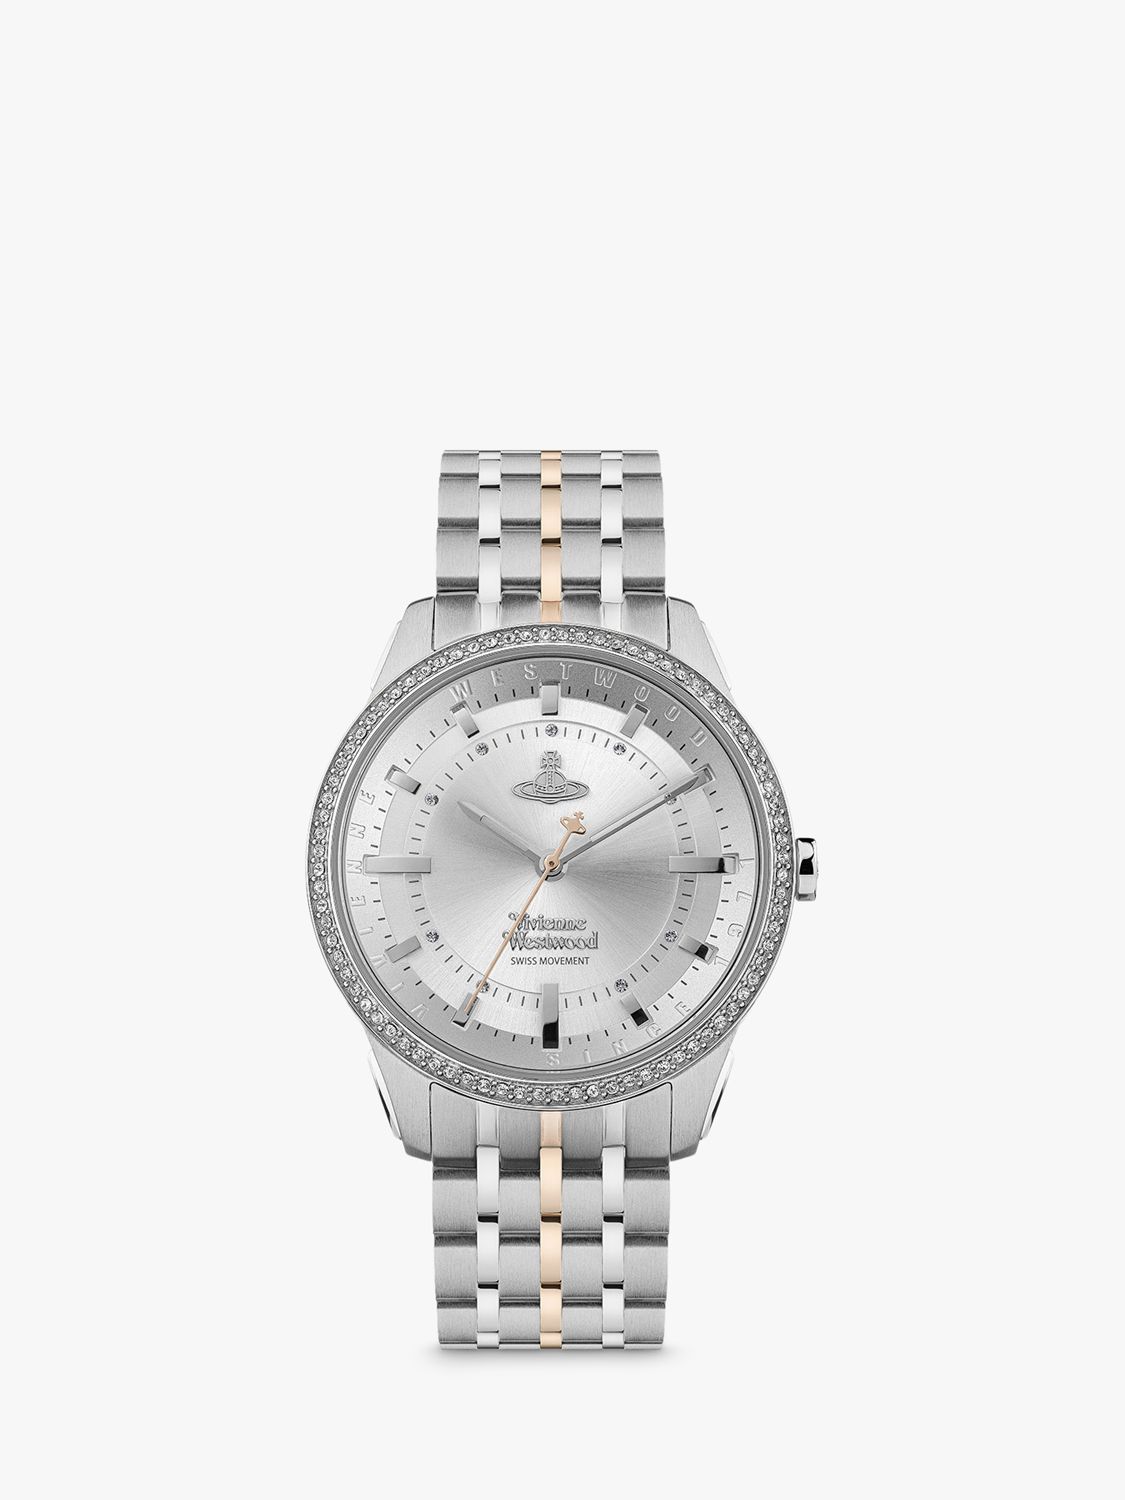 Vivienne Westwood Watches Womens | vlr.eng.br